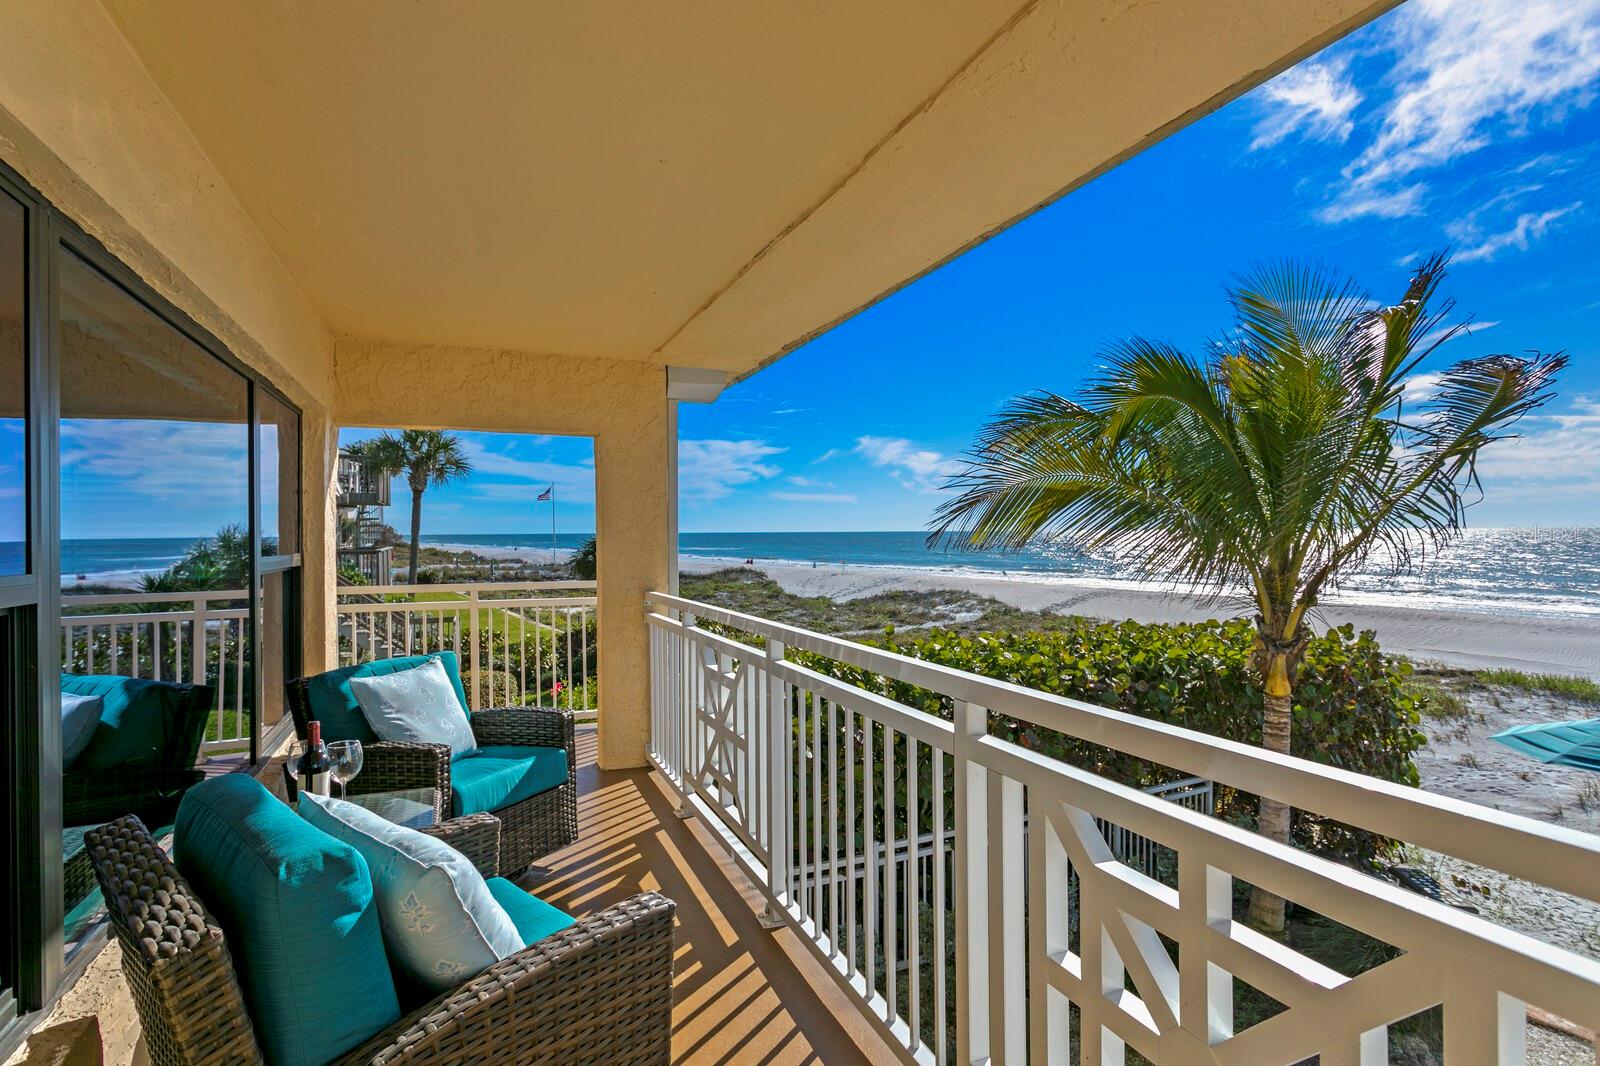 Upstairs covered balcony with custom railing as well as staircase private entry.  With a view like this, you'll never want to go inside!